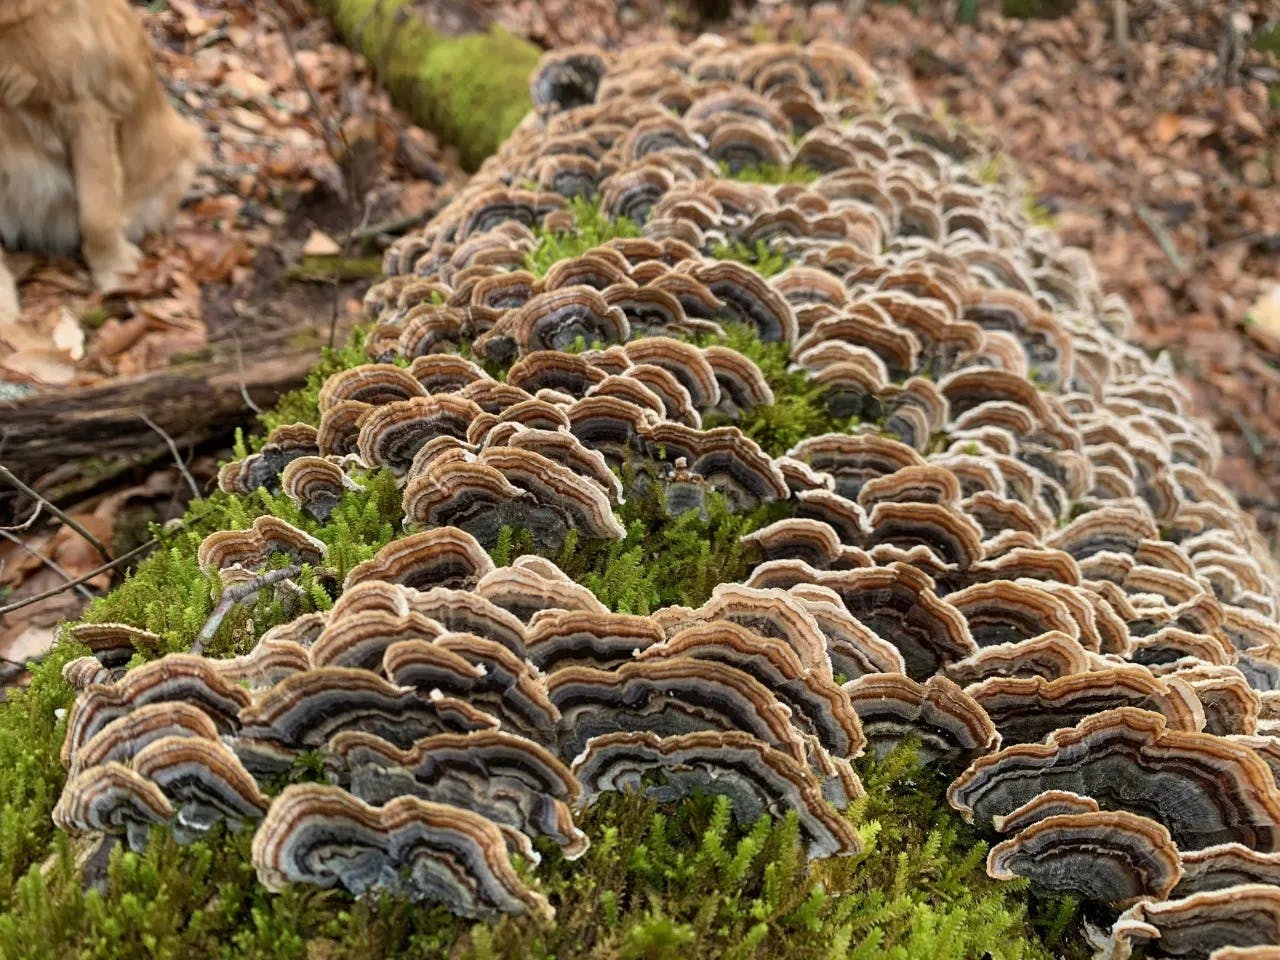 From Sautéing to Steaming: How to Prepare Turkey Tail Mushrooms for Cooking